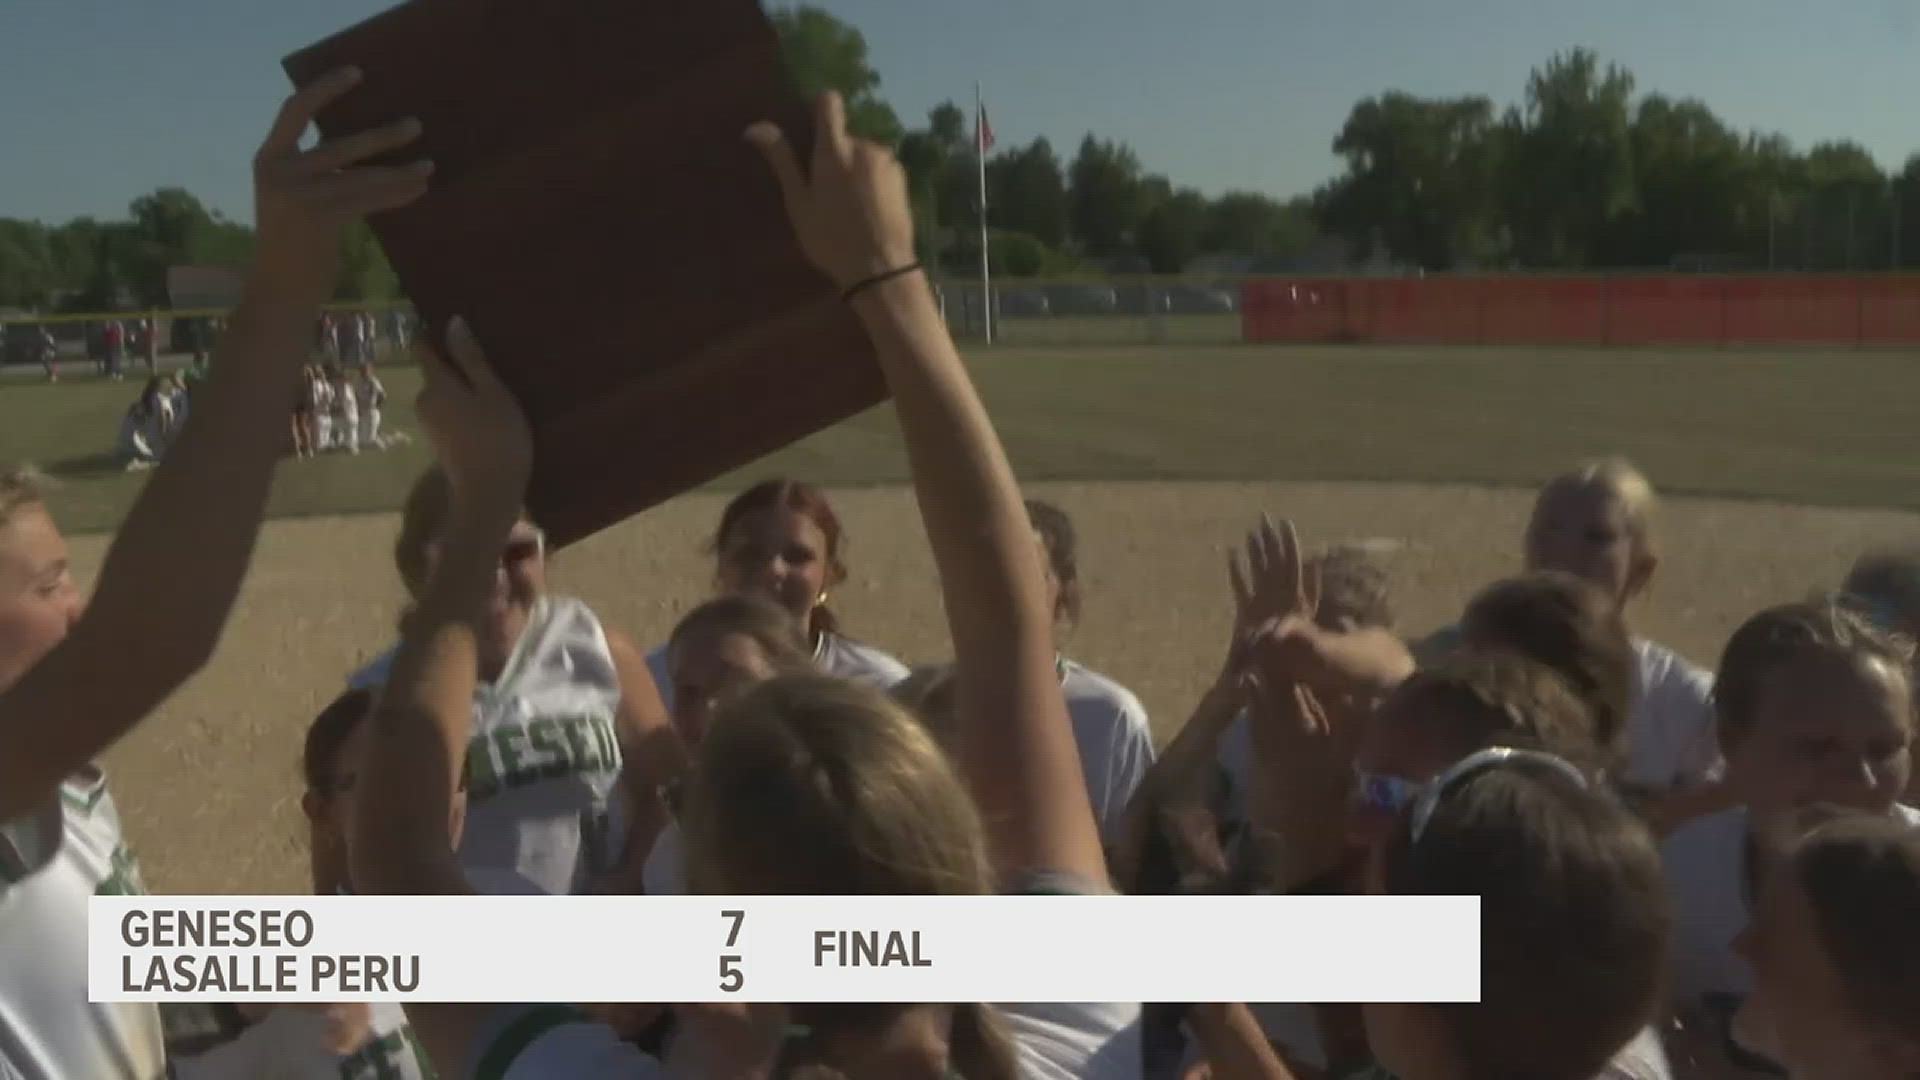 Geneseo would score 6 times in the 7th inning to come back and beat LaSalle Peru for the 3A Region Championship.